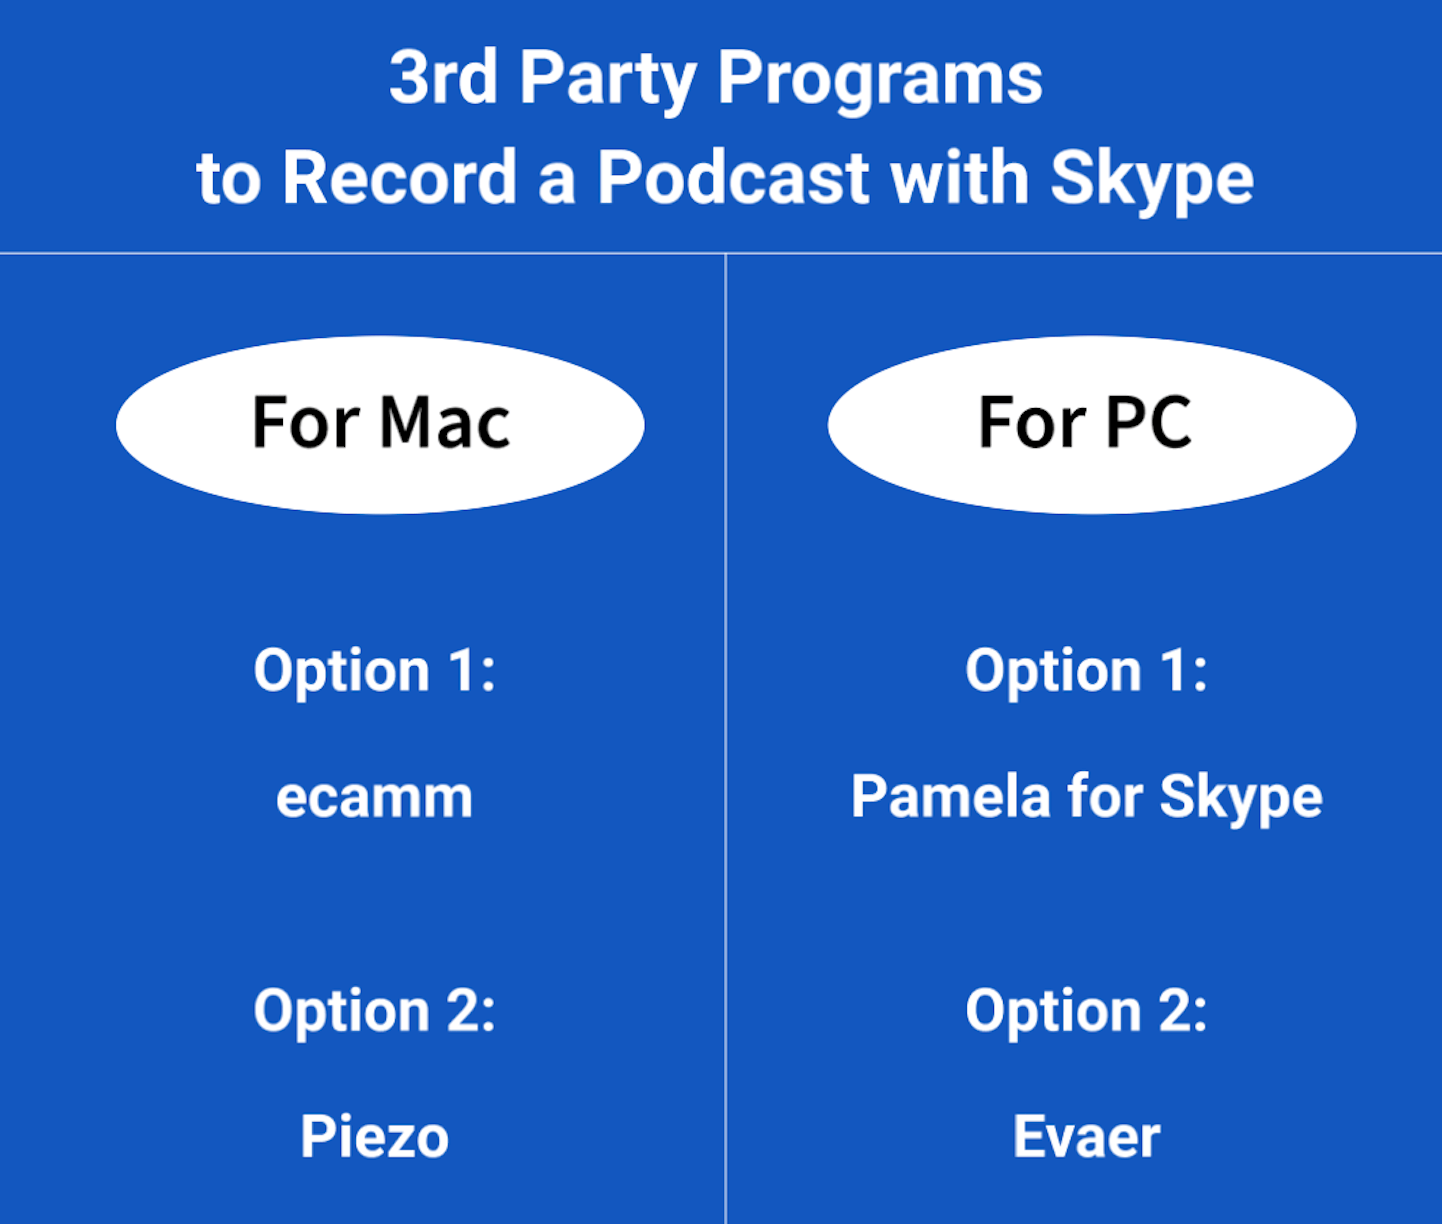 3rd party programs for recording on Skype